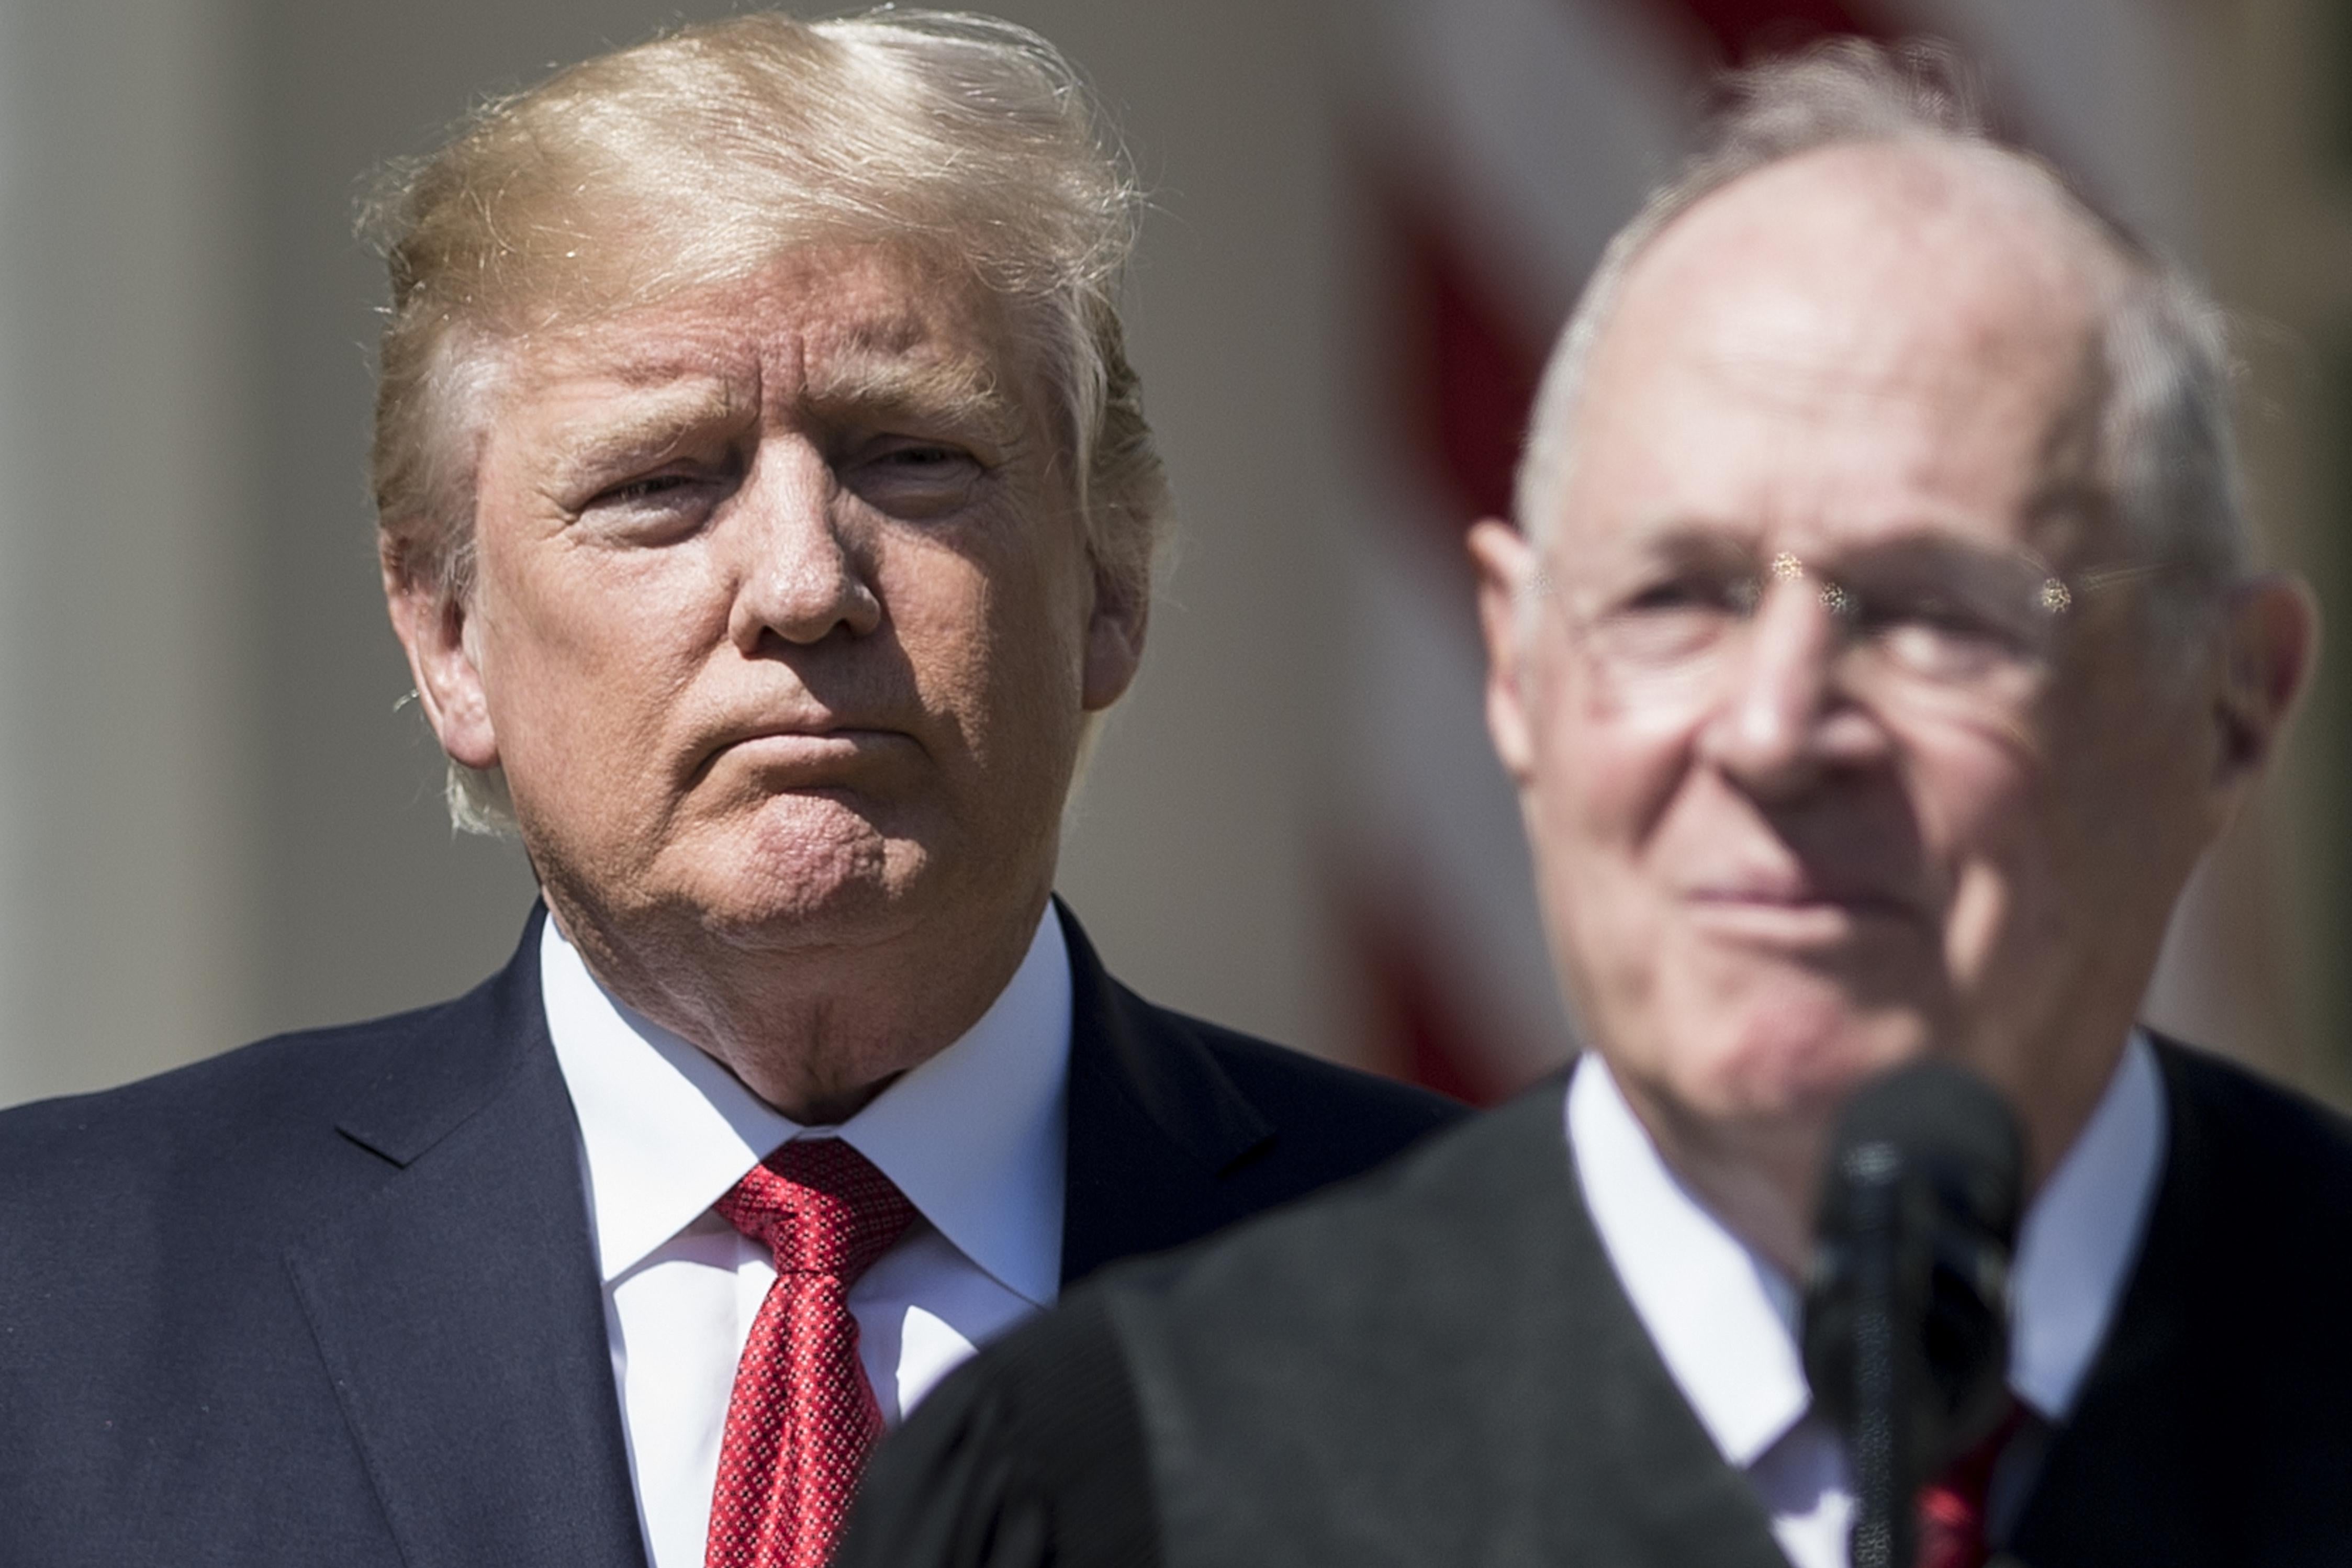 President Donald Trump listens while Supreme Court Justice Anthony Kennedy speaks during a ceremony on April 10, 2017, in Washington.